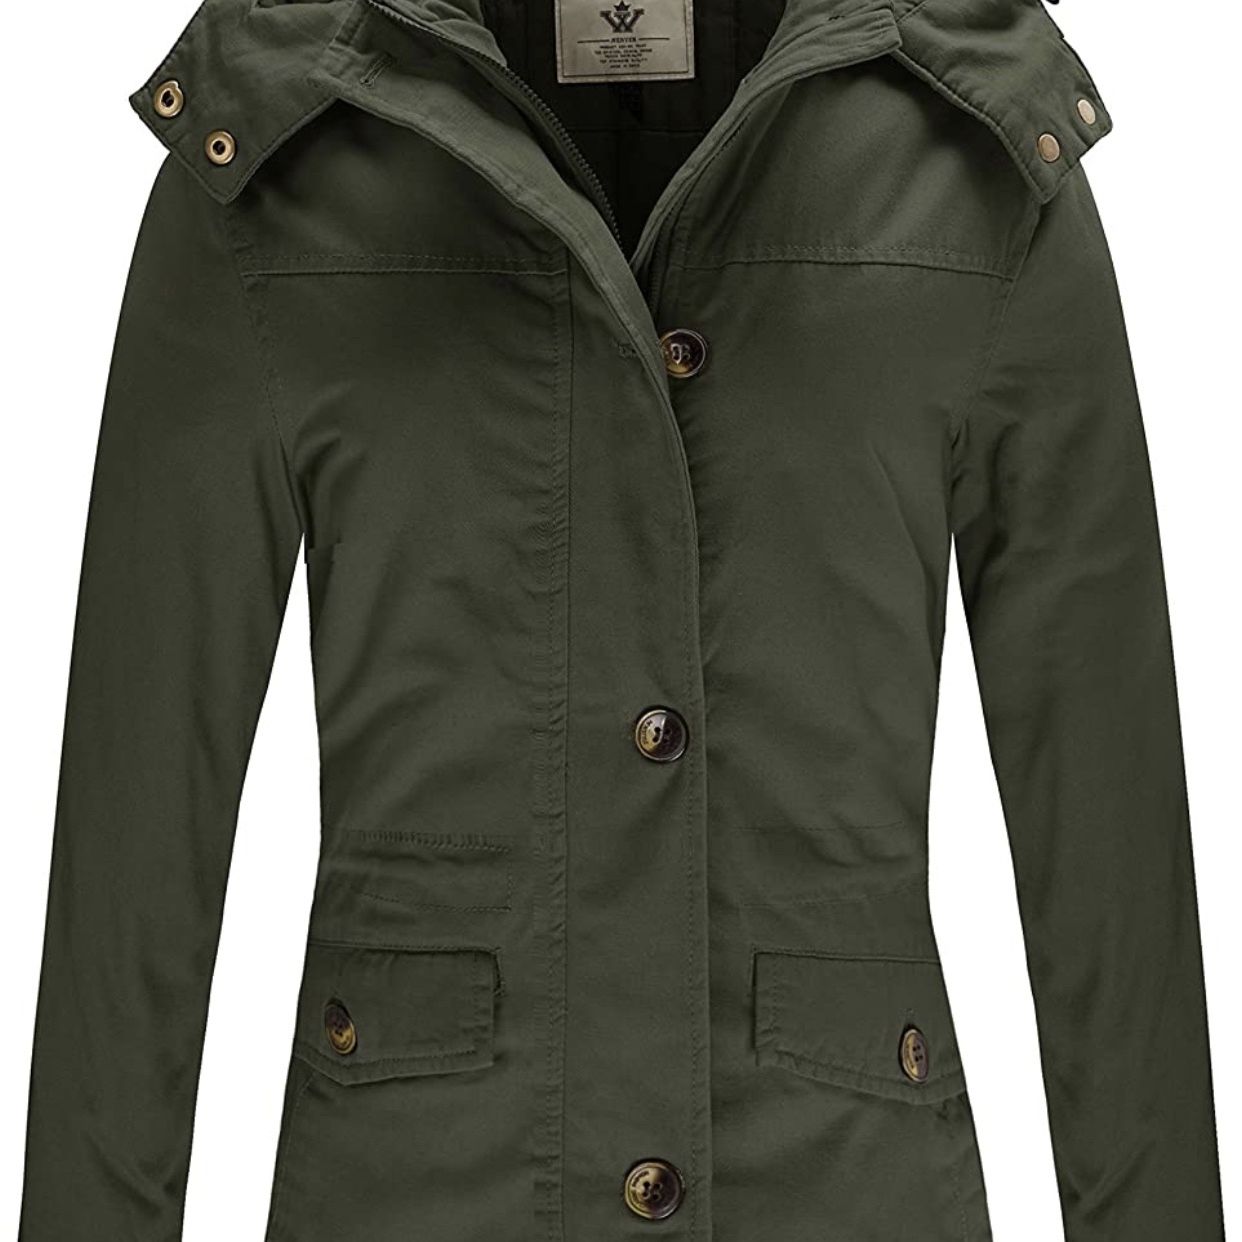 New Women's Warm Thickened Winter Parka Jacket with Removable Hood